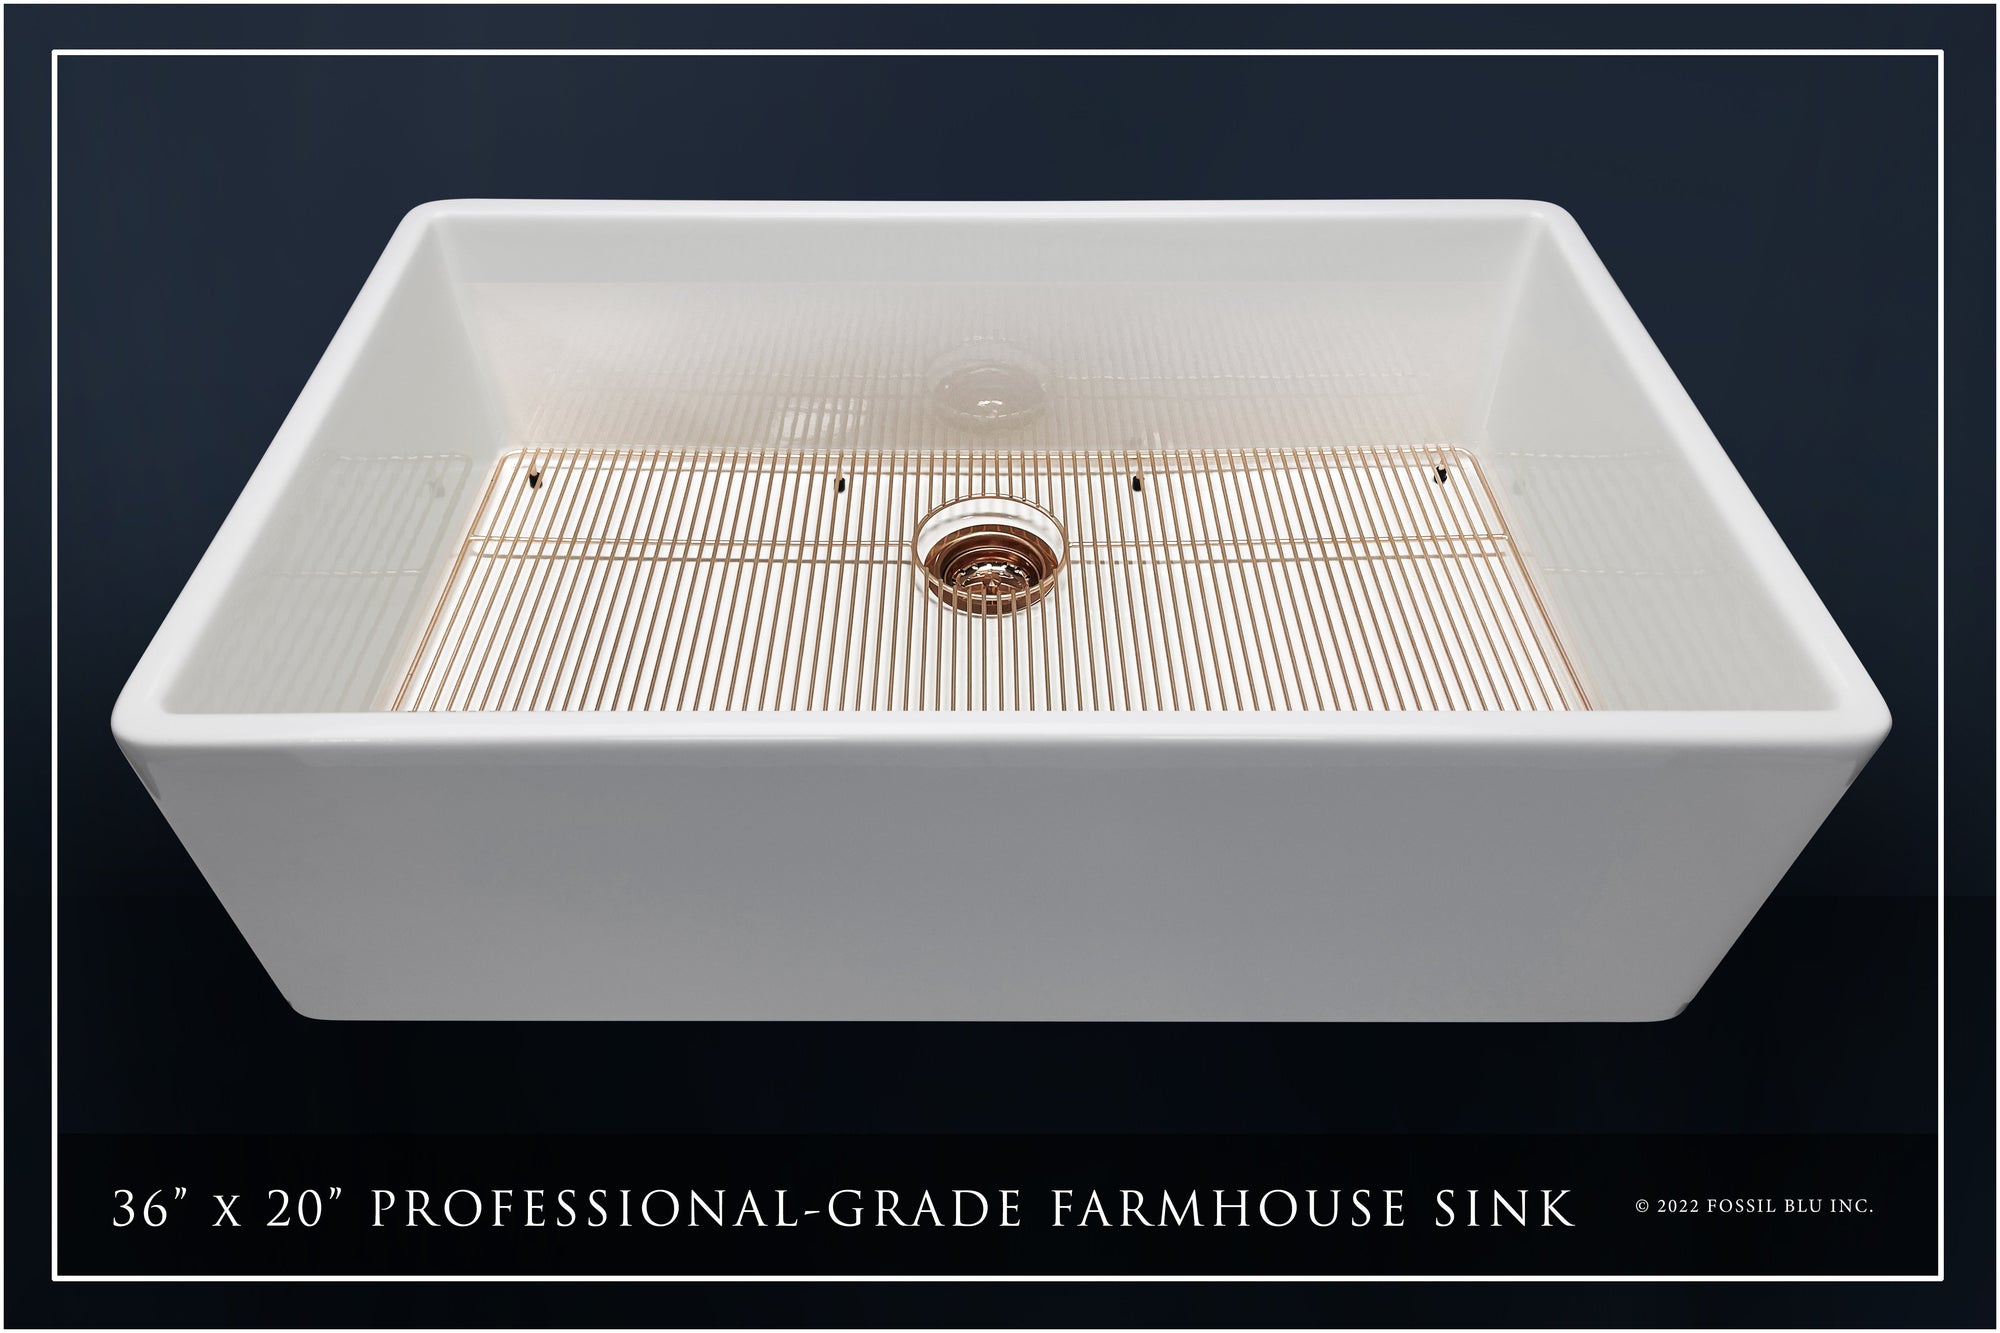 FSW1008RG LUXURY 36-INCH SOLID FIRECLAY FARMHOUSE SINK IN WHITE, POL. ROSE GOLD ACCS, FLAT FRONT